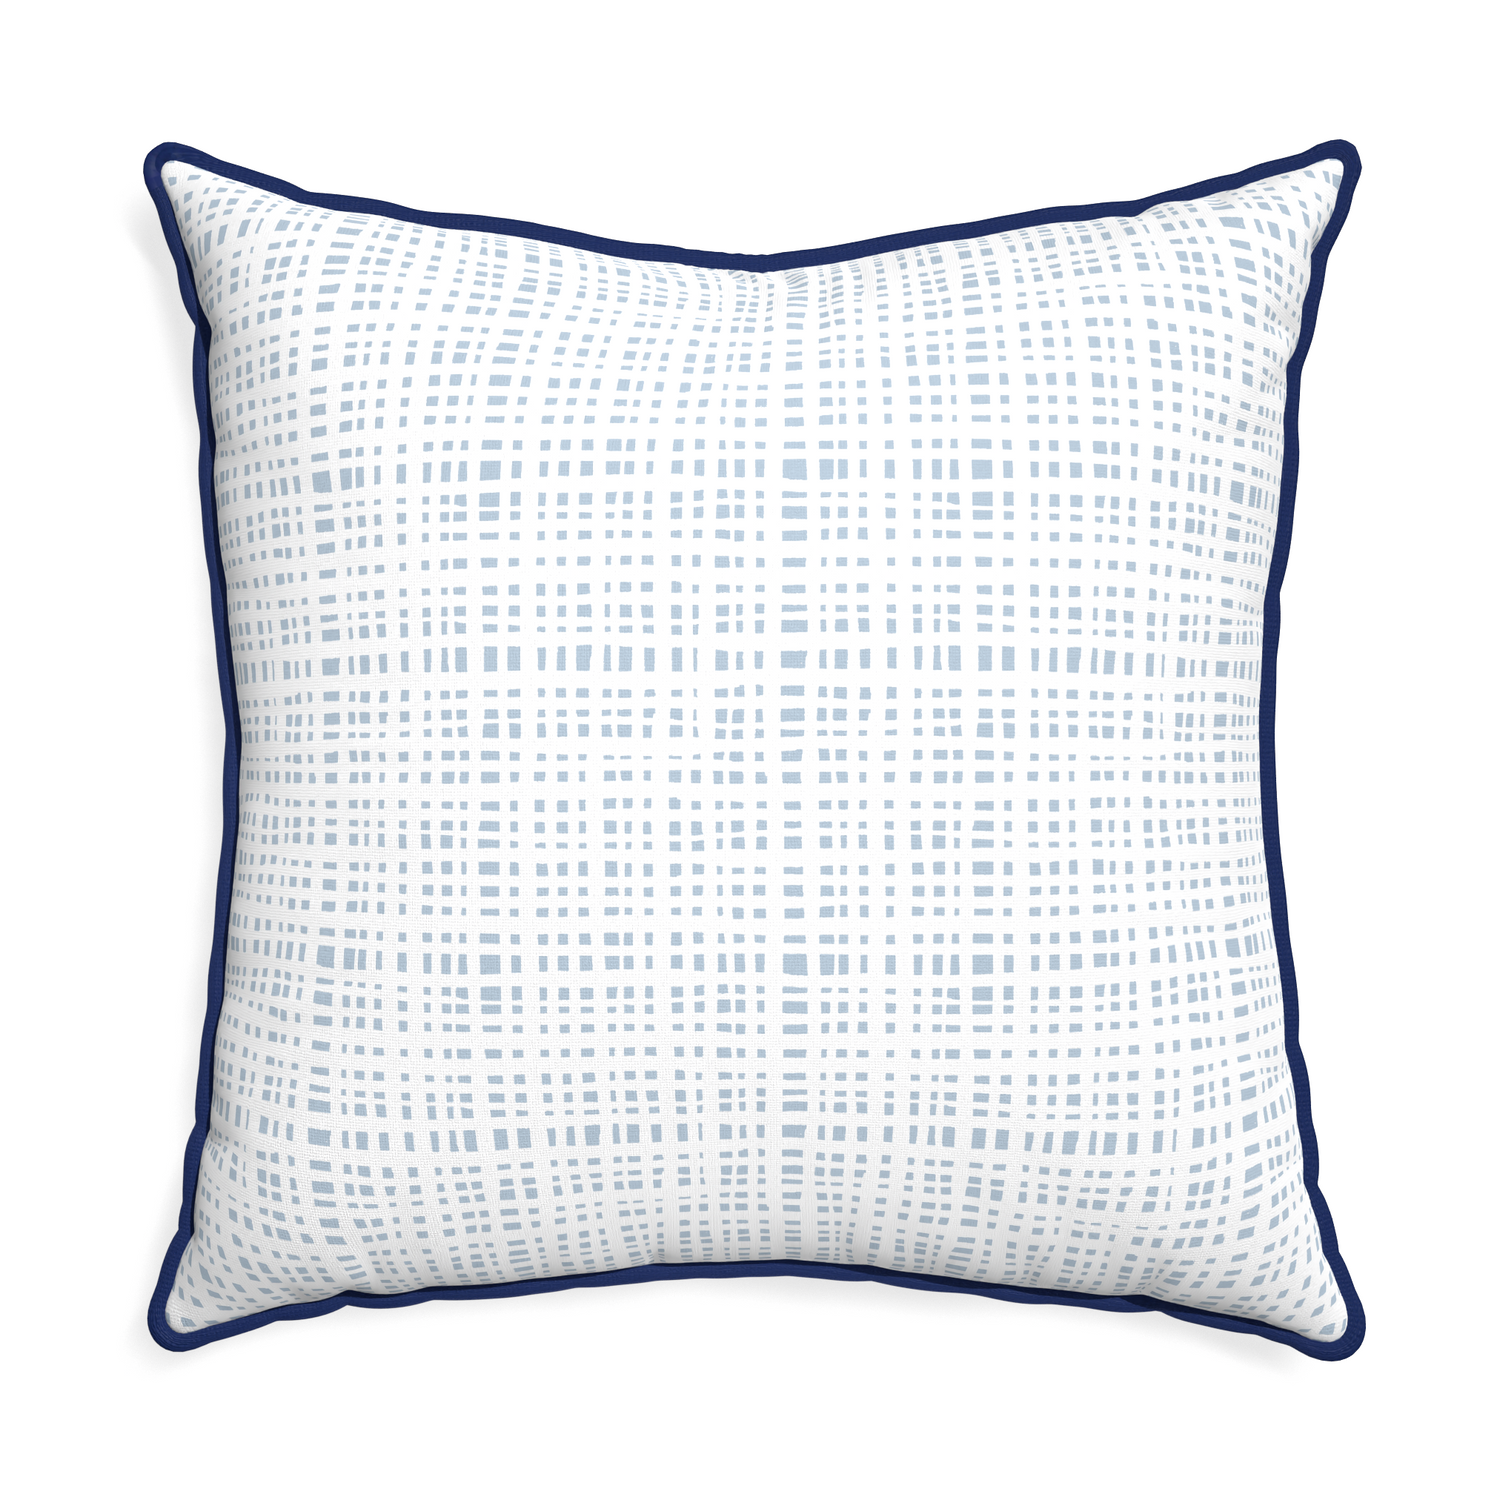 Euro-sham ginger sky custom pillow with midnight piping on white background